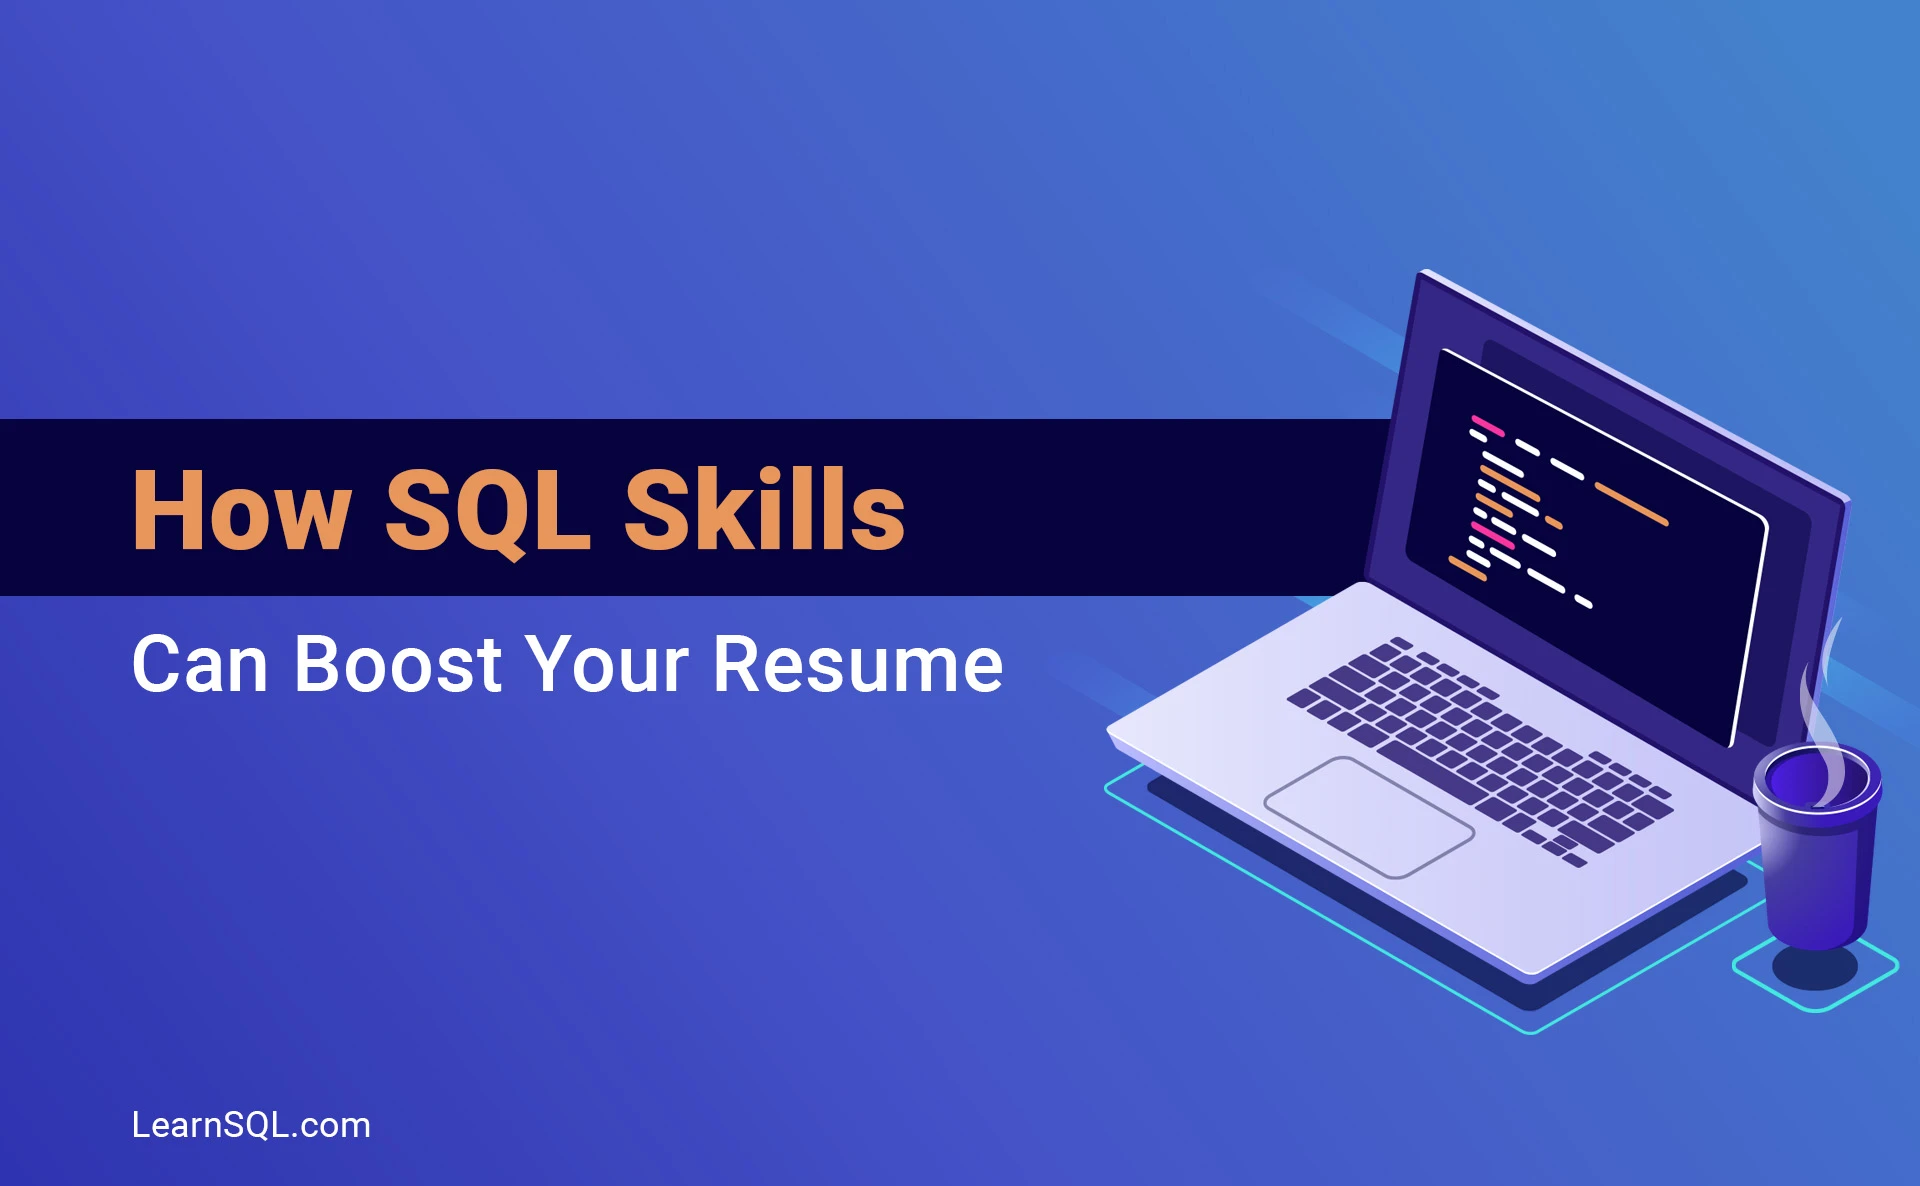 How SQL Skills Can Boost Your Resume